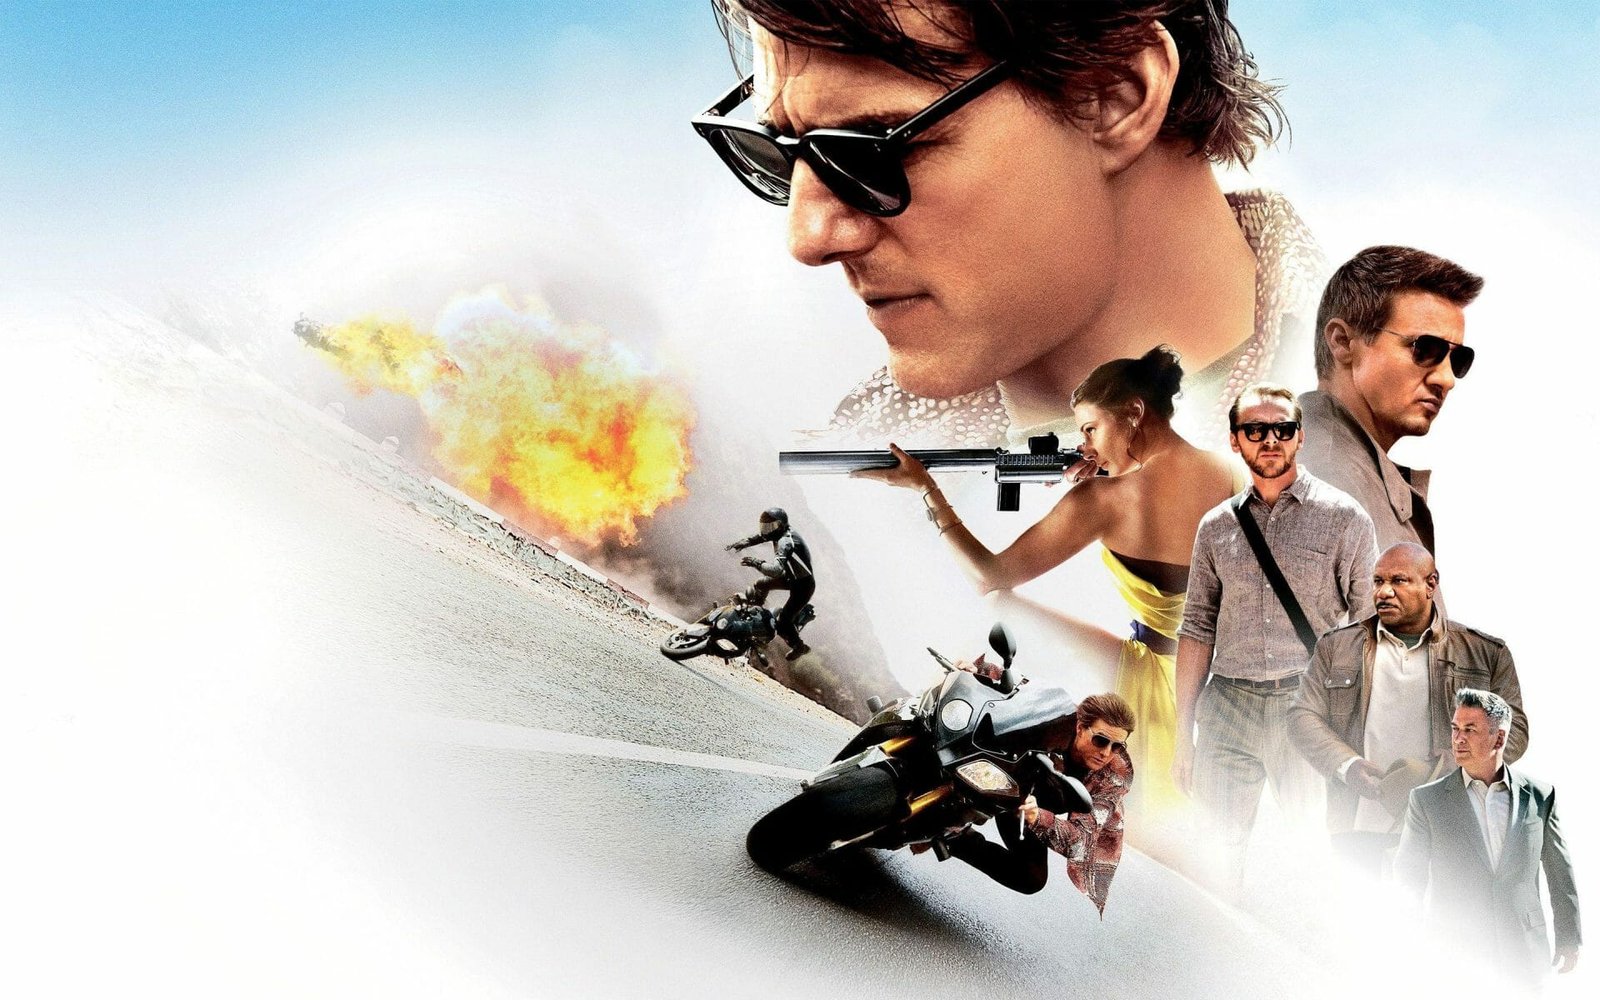 Tom Cruise Movies: Mission Impossible